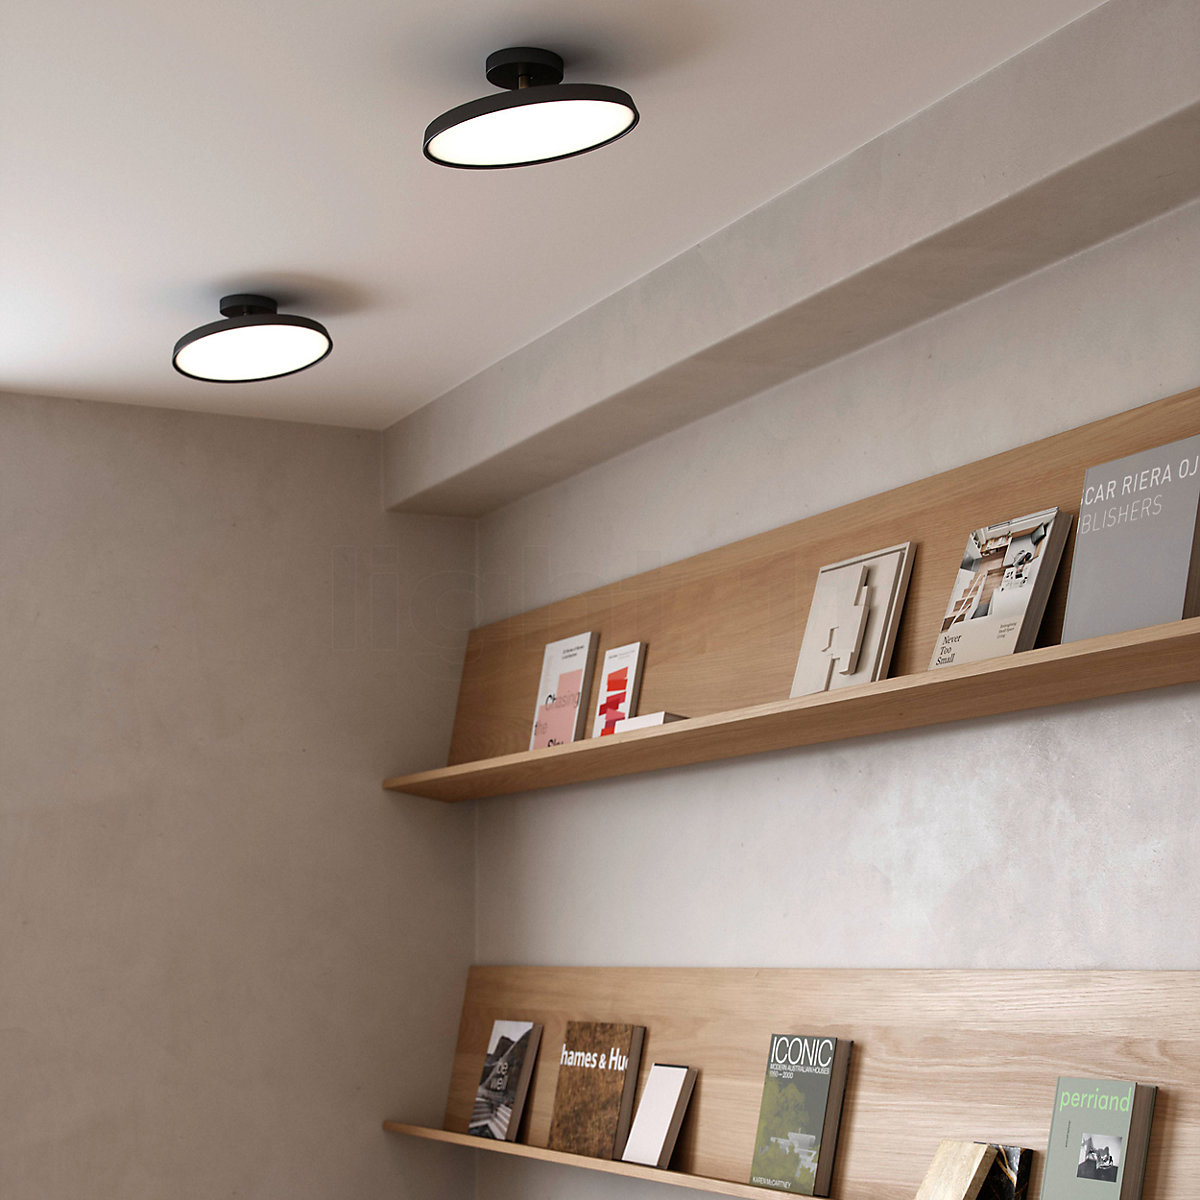 Buy Design for the People Kaito Pro Ceiling Light LED at